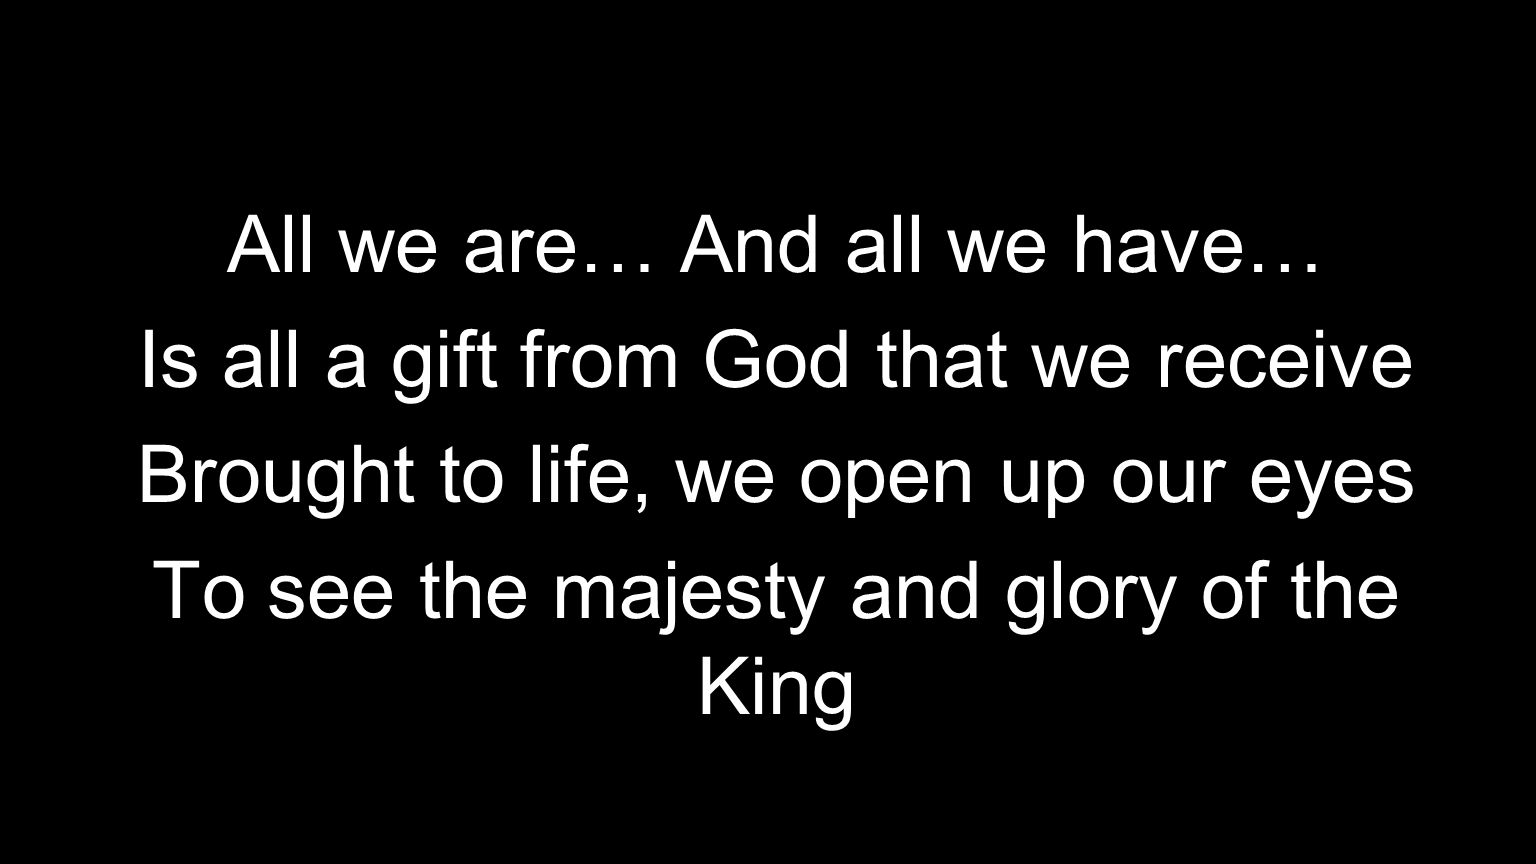 All we are… And all we have… Is all a gift from God that we receive Brought to life, we open up our eyes To see the majesty and glory of the King